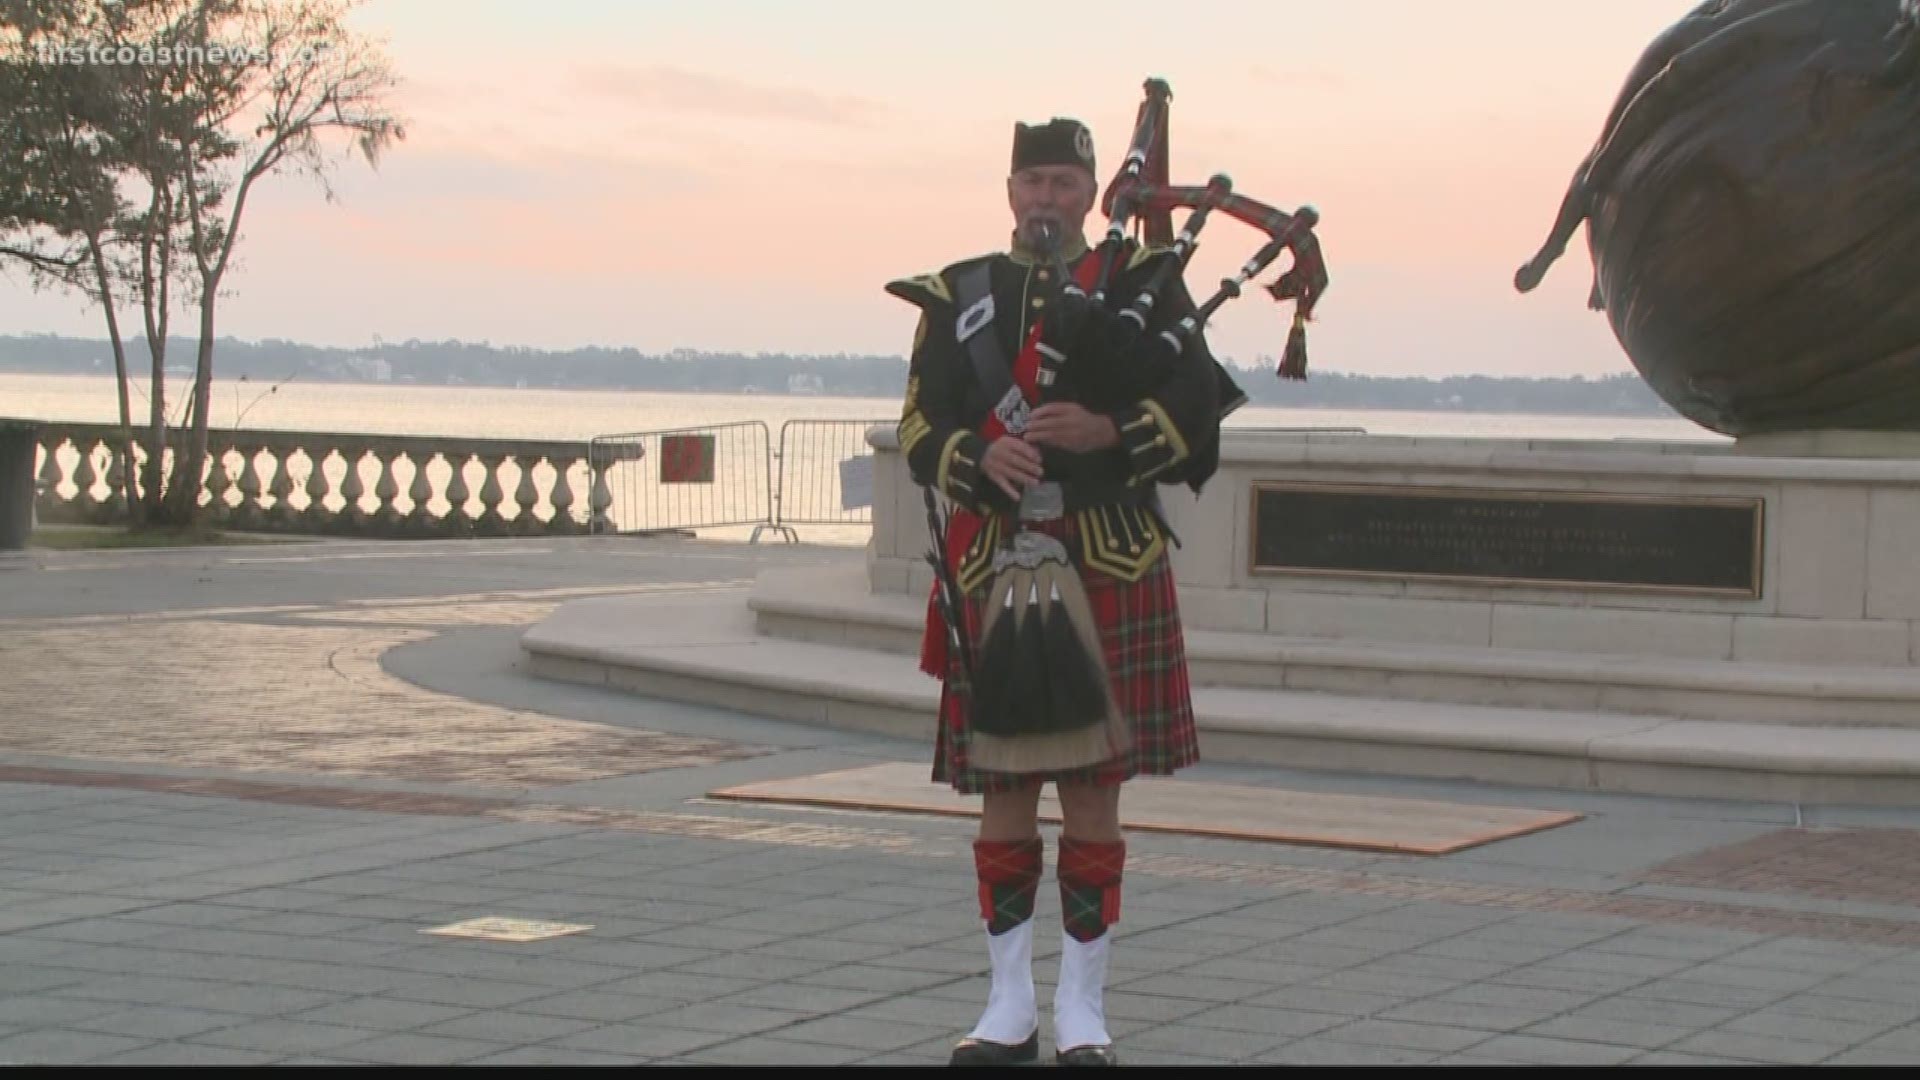 Bagpiper Doug Russell was humbled to play 'Battle's O'er' and other songs at Memorial Park Sunday, which was dedicated to those who fought in WWI.